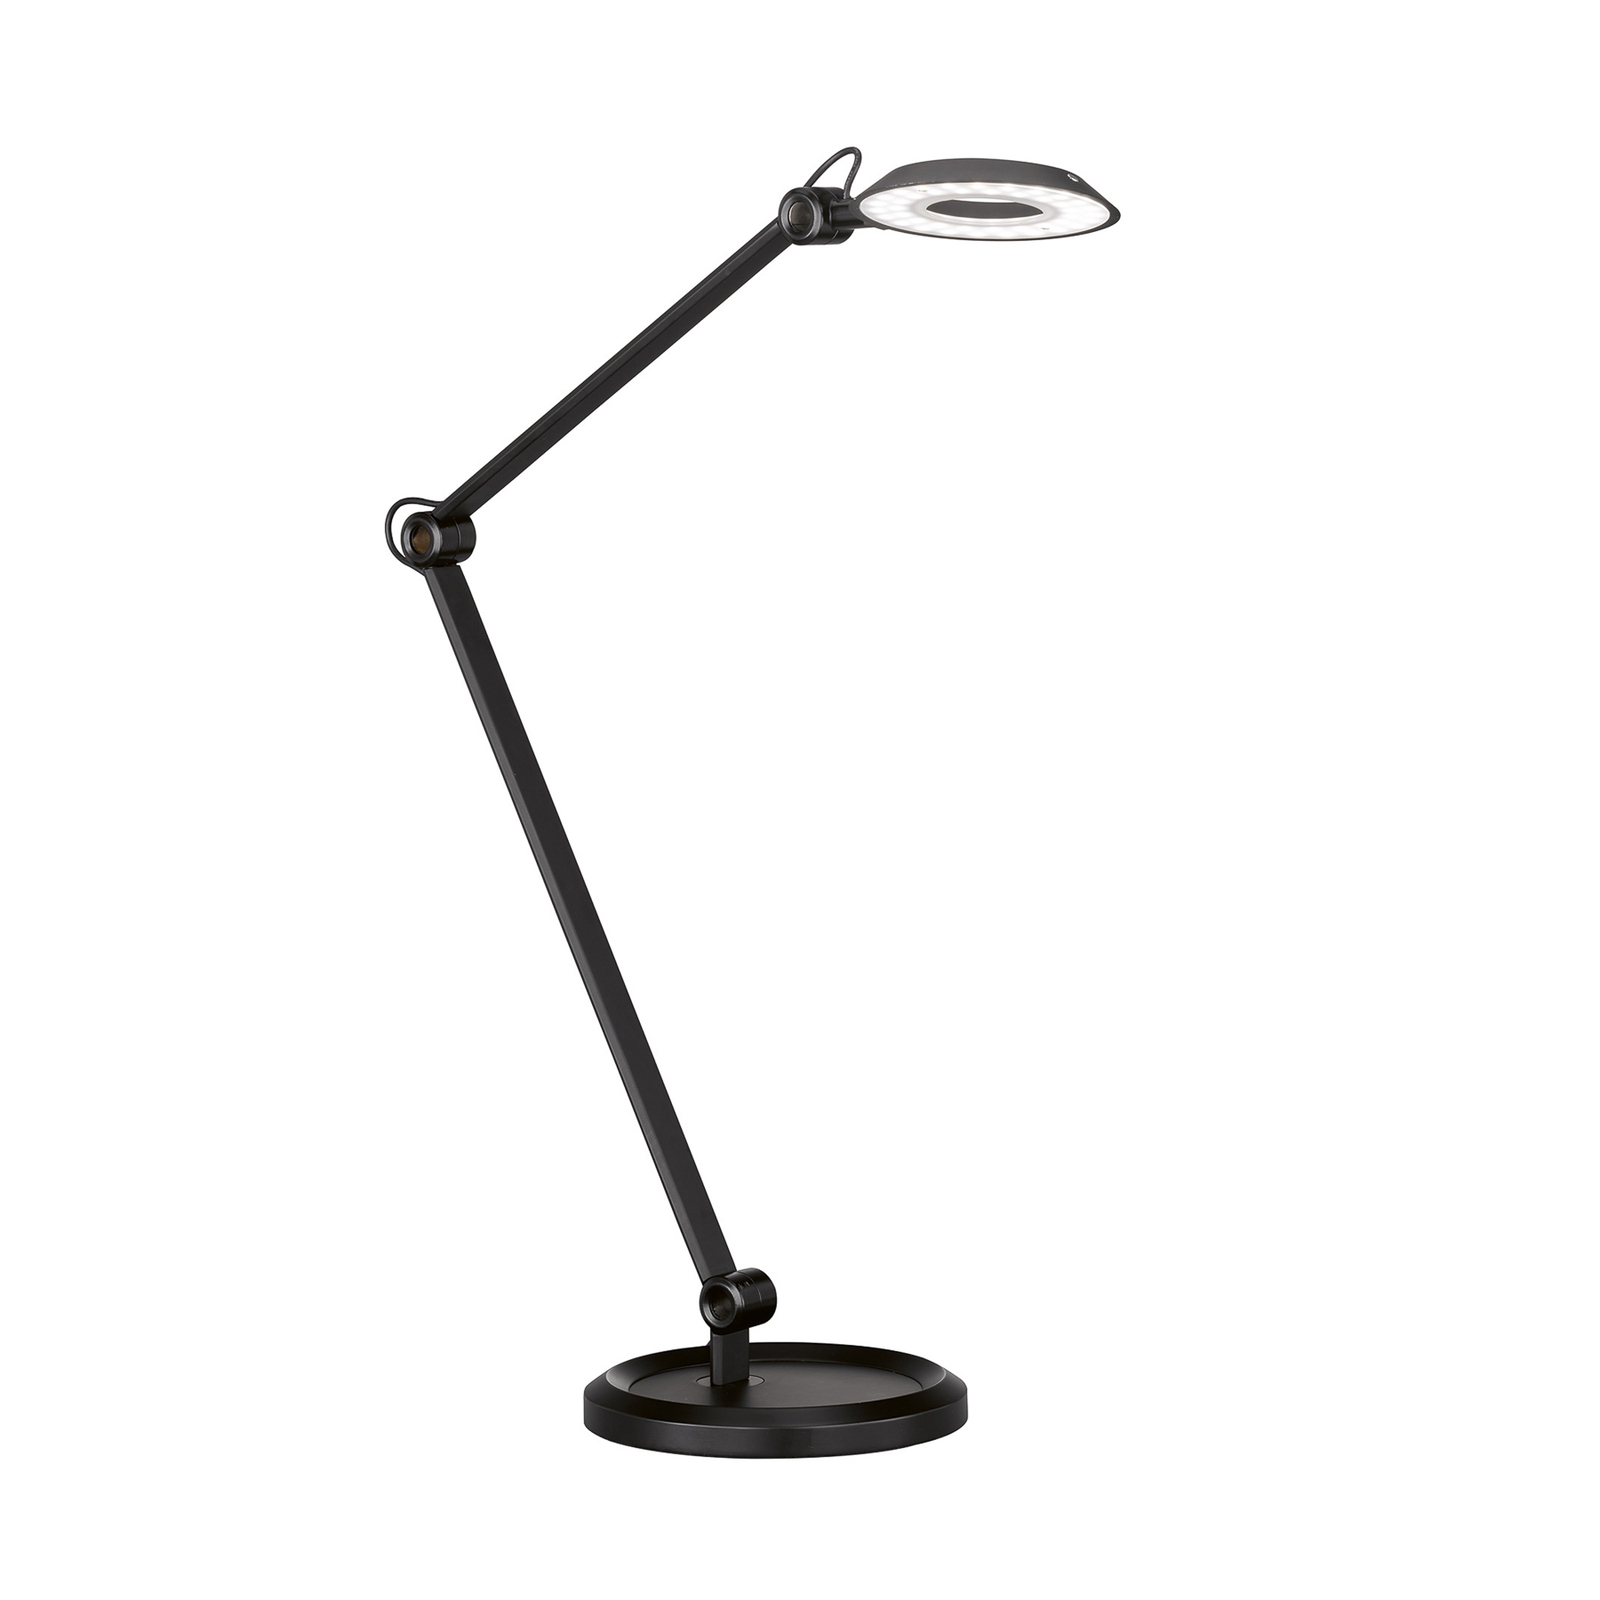 Schöner Wohnen Office LED table lamp 2 arms 65 cm